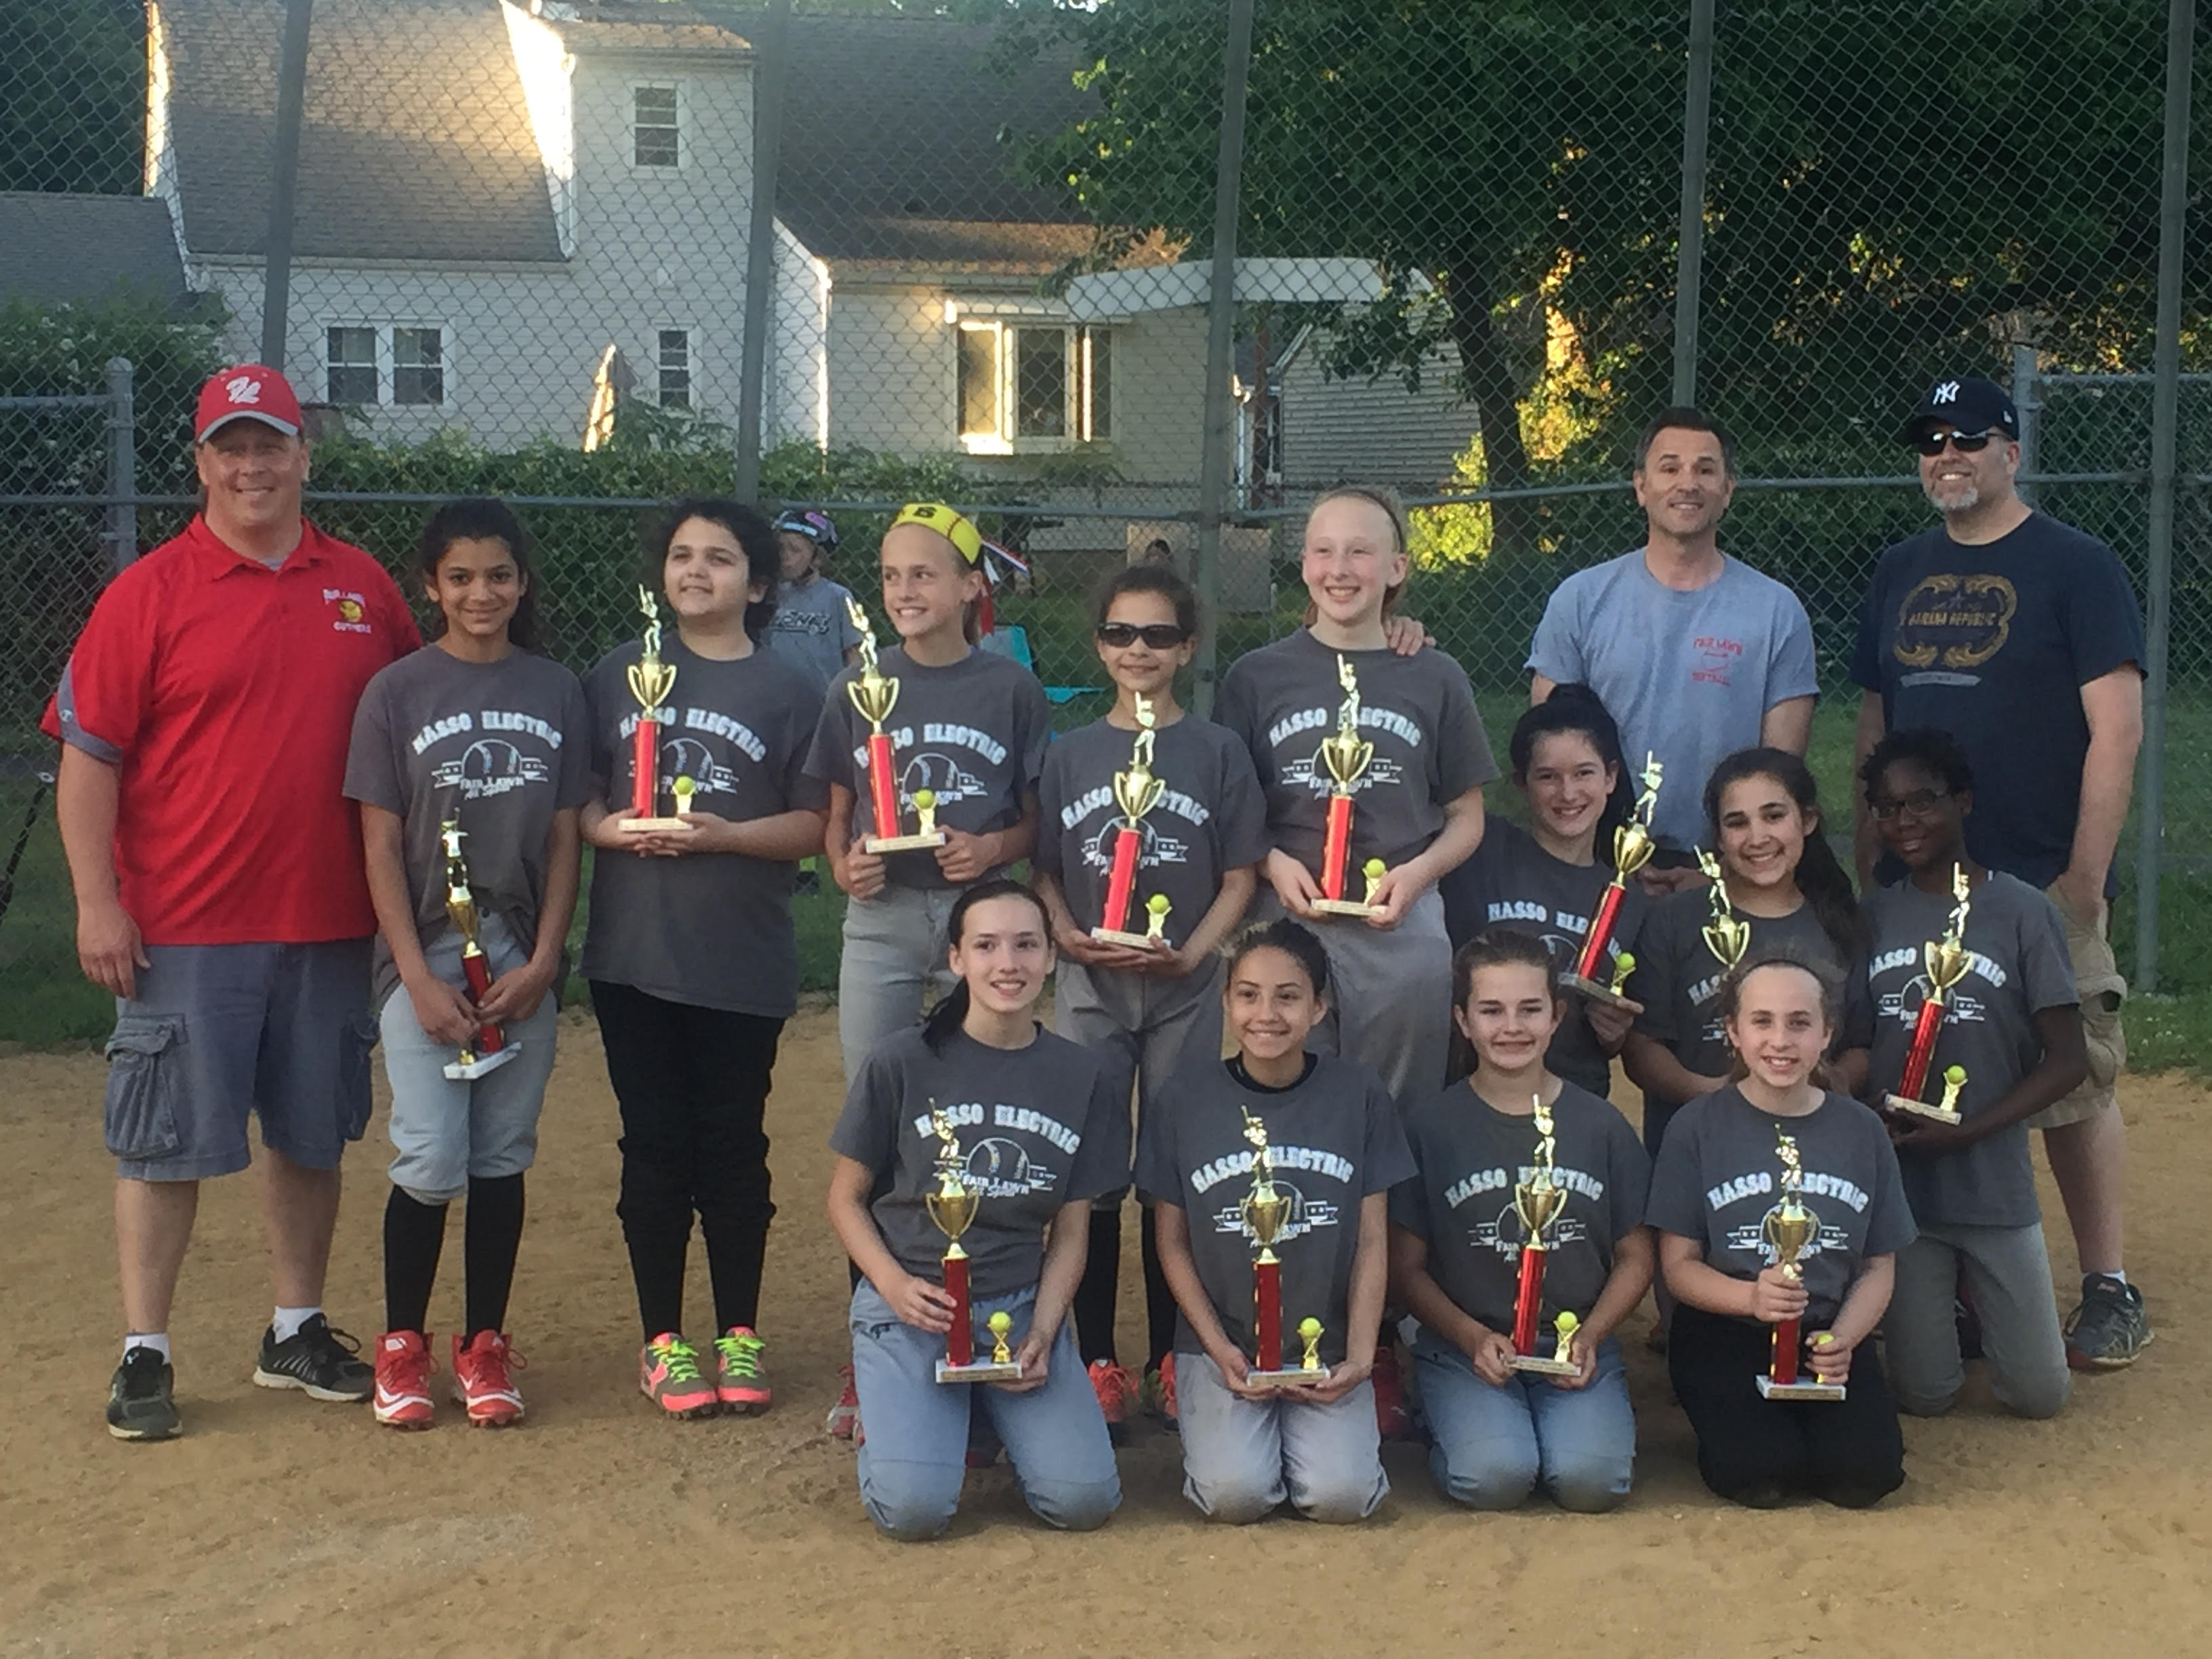 Softball Rec Champs 5th and 6th